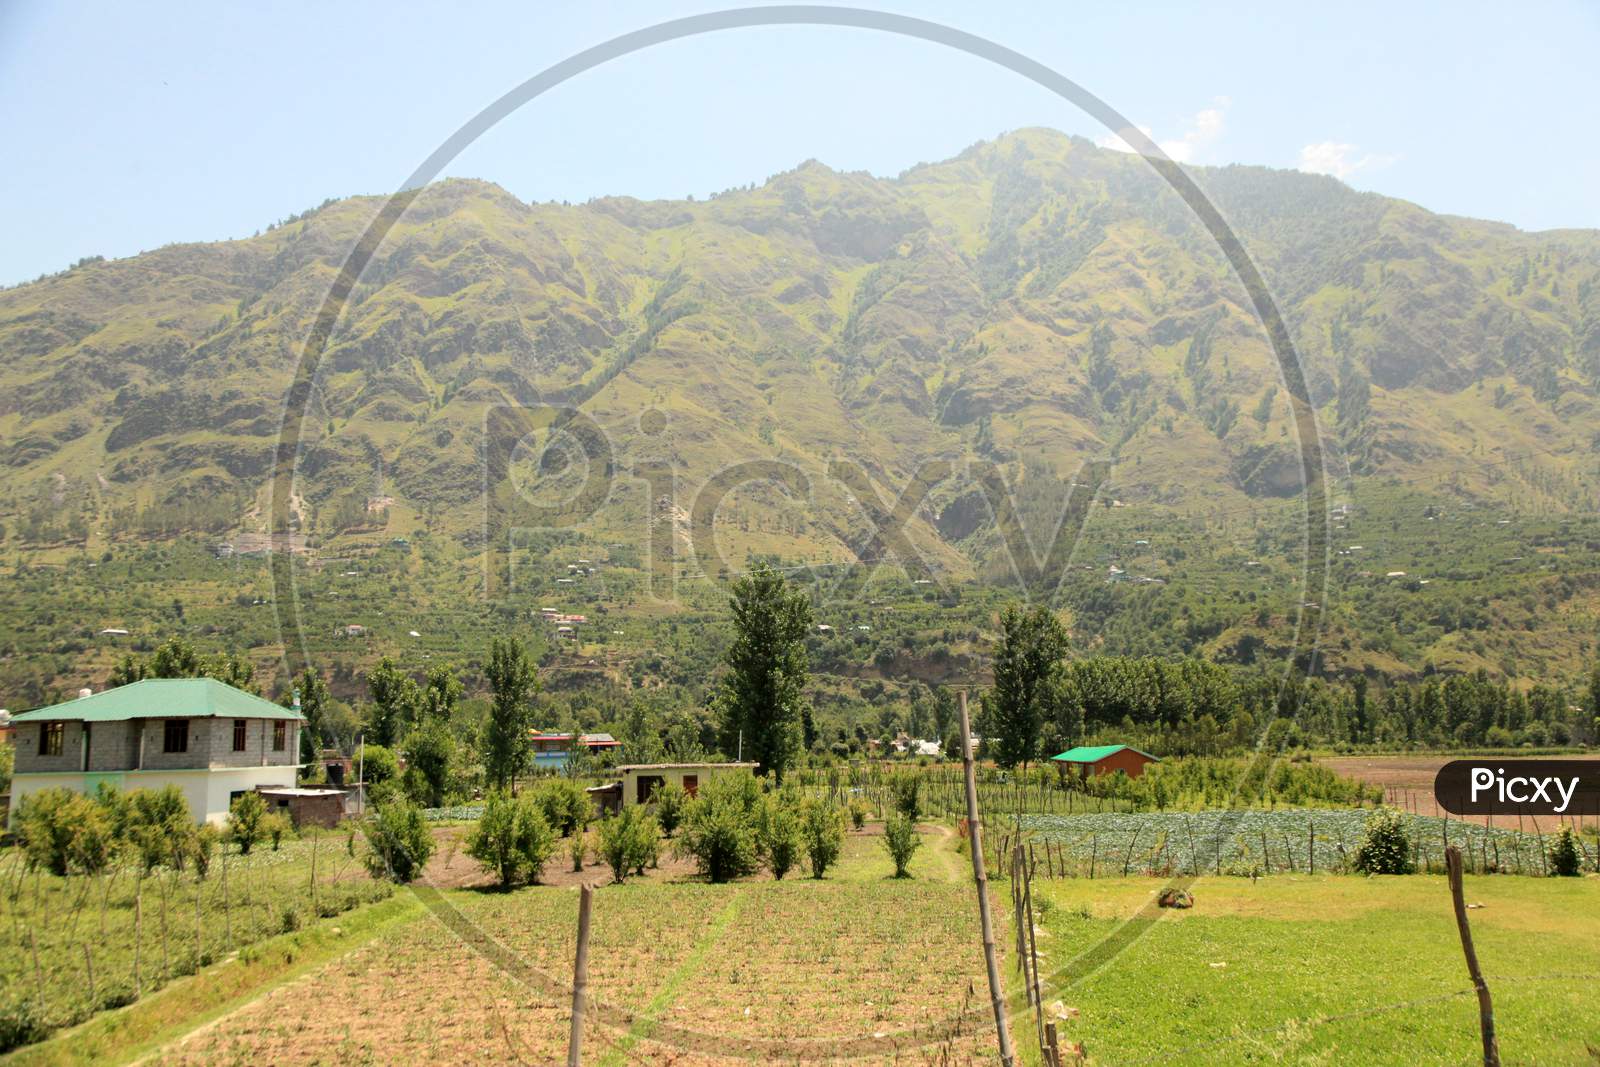 Beautiful Mountains of Himachal Pradesh with agriculture fields in the foreground